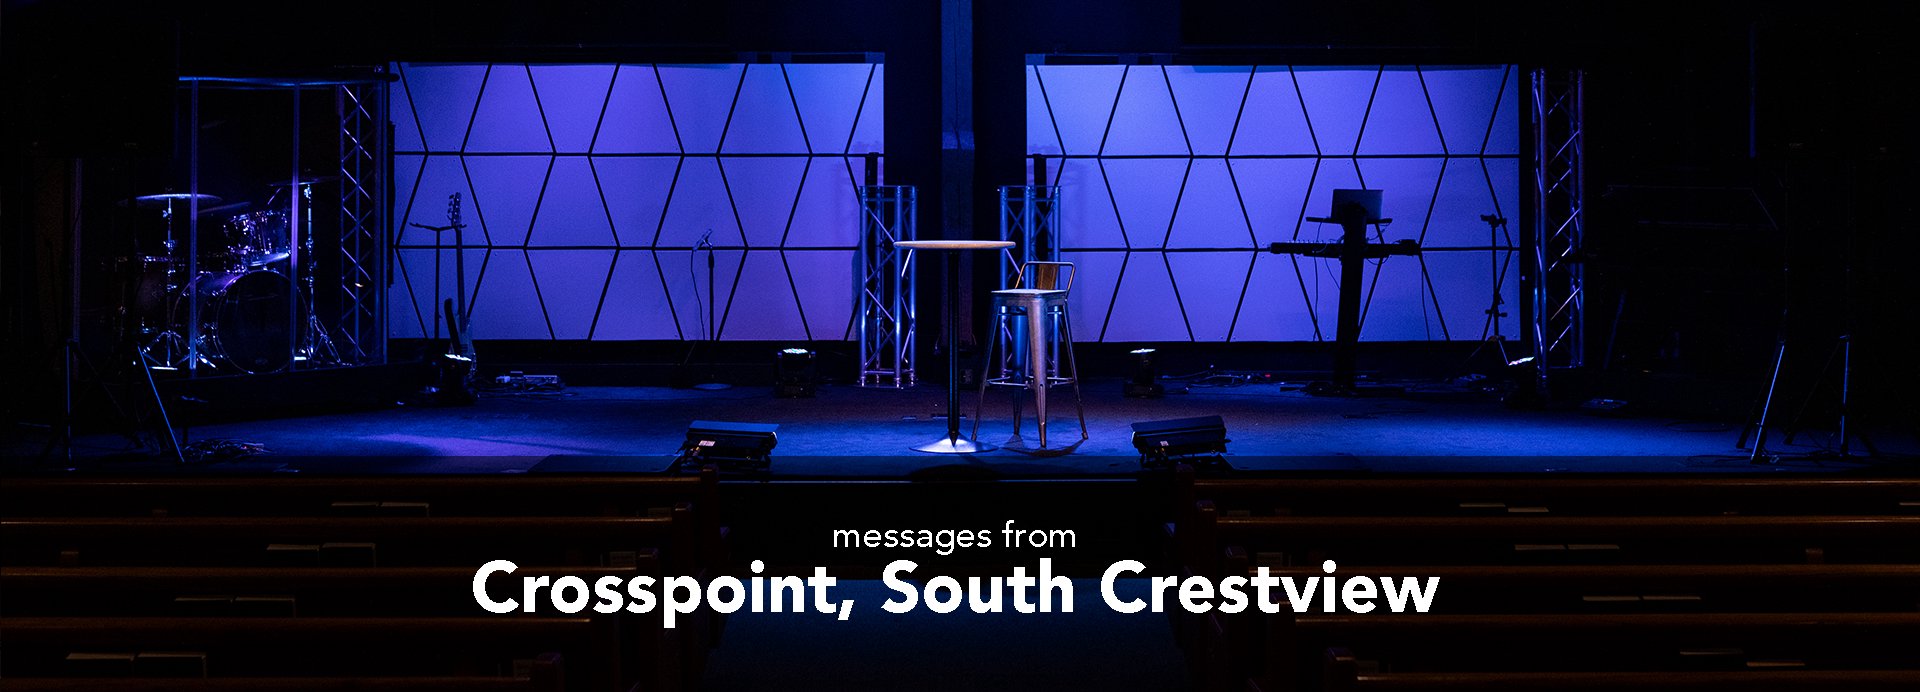 Crosspoint, South Crestview - Crosspoint Church